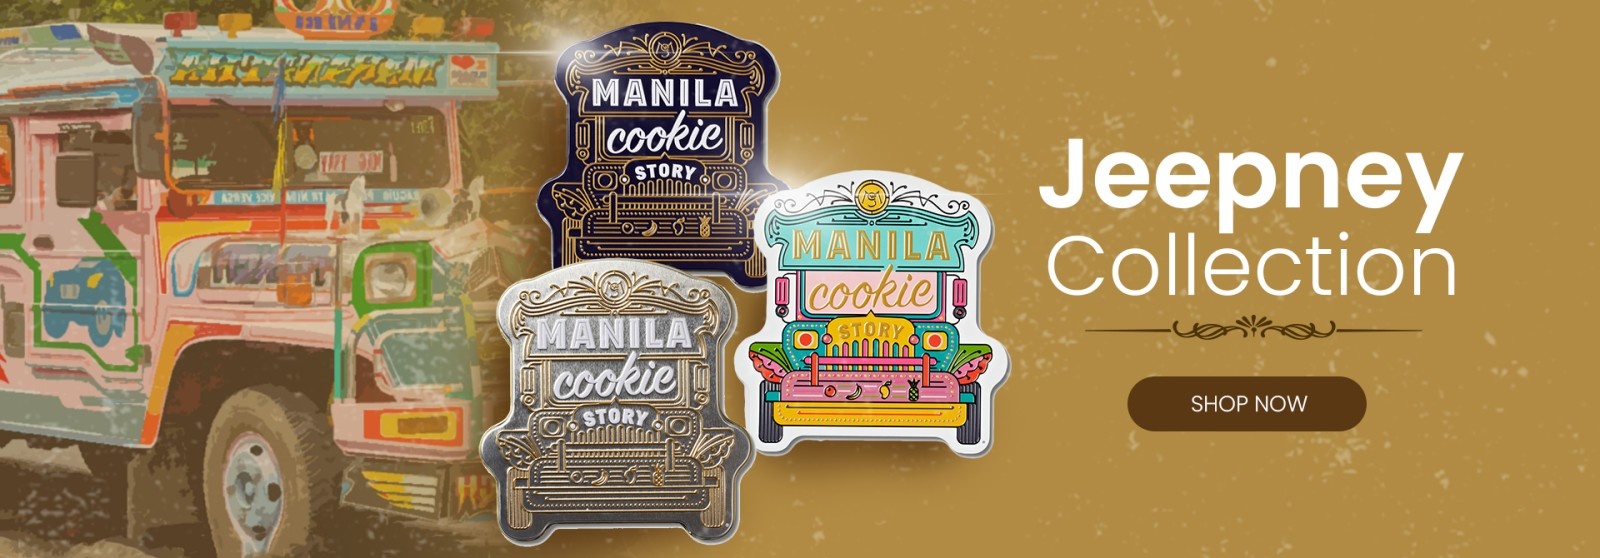 Jeepney Collection